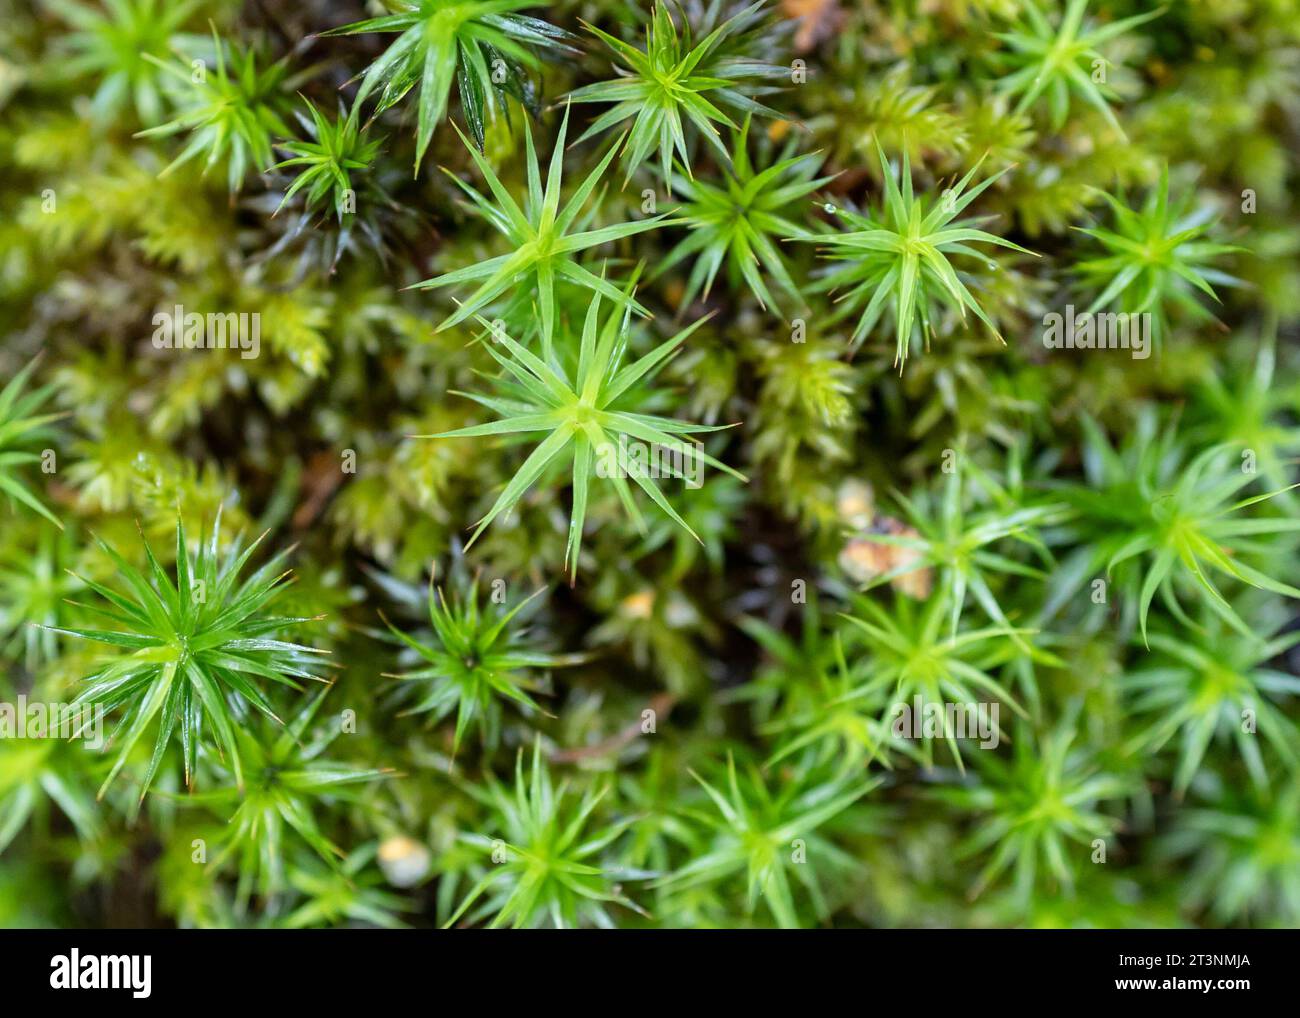 Spiked plants viewed from above Stock Photo